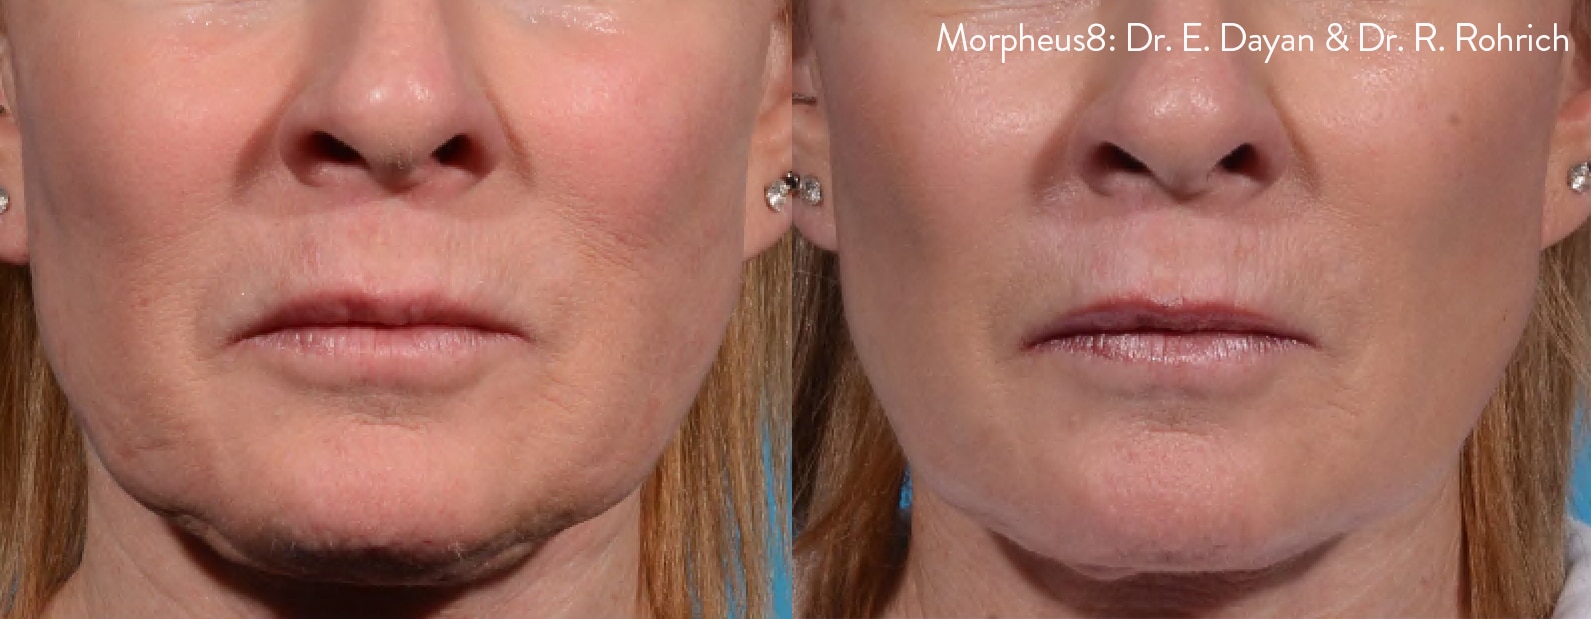 morpheus8-before-after-dr-e-dayan-dr-r-rohrich-preview-1